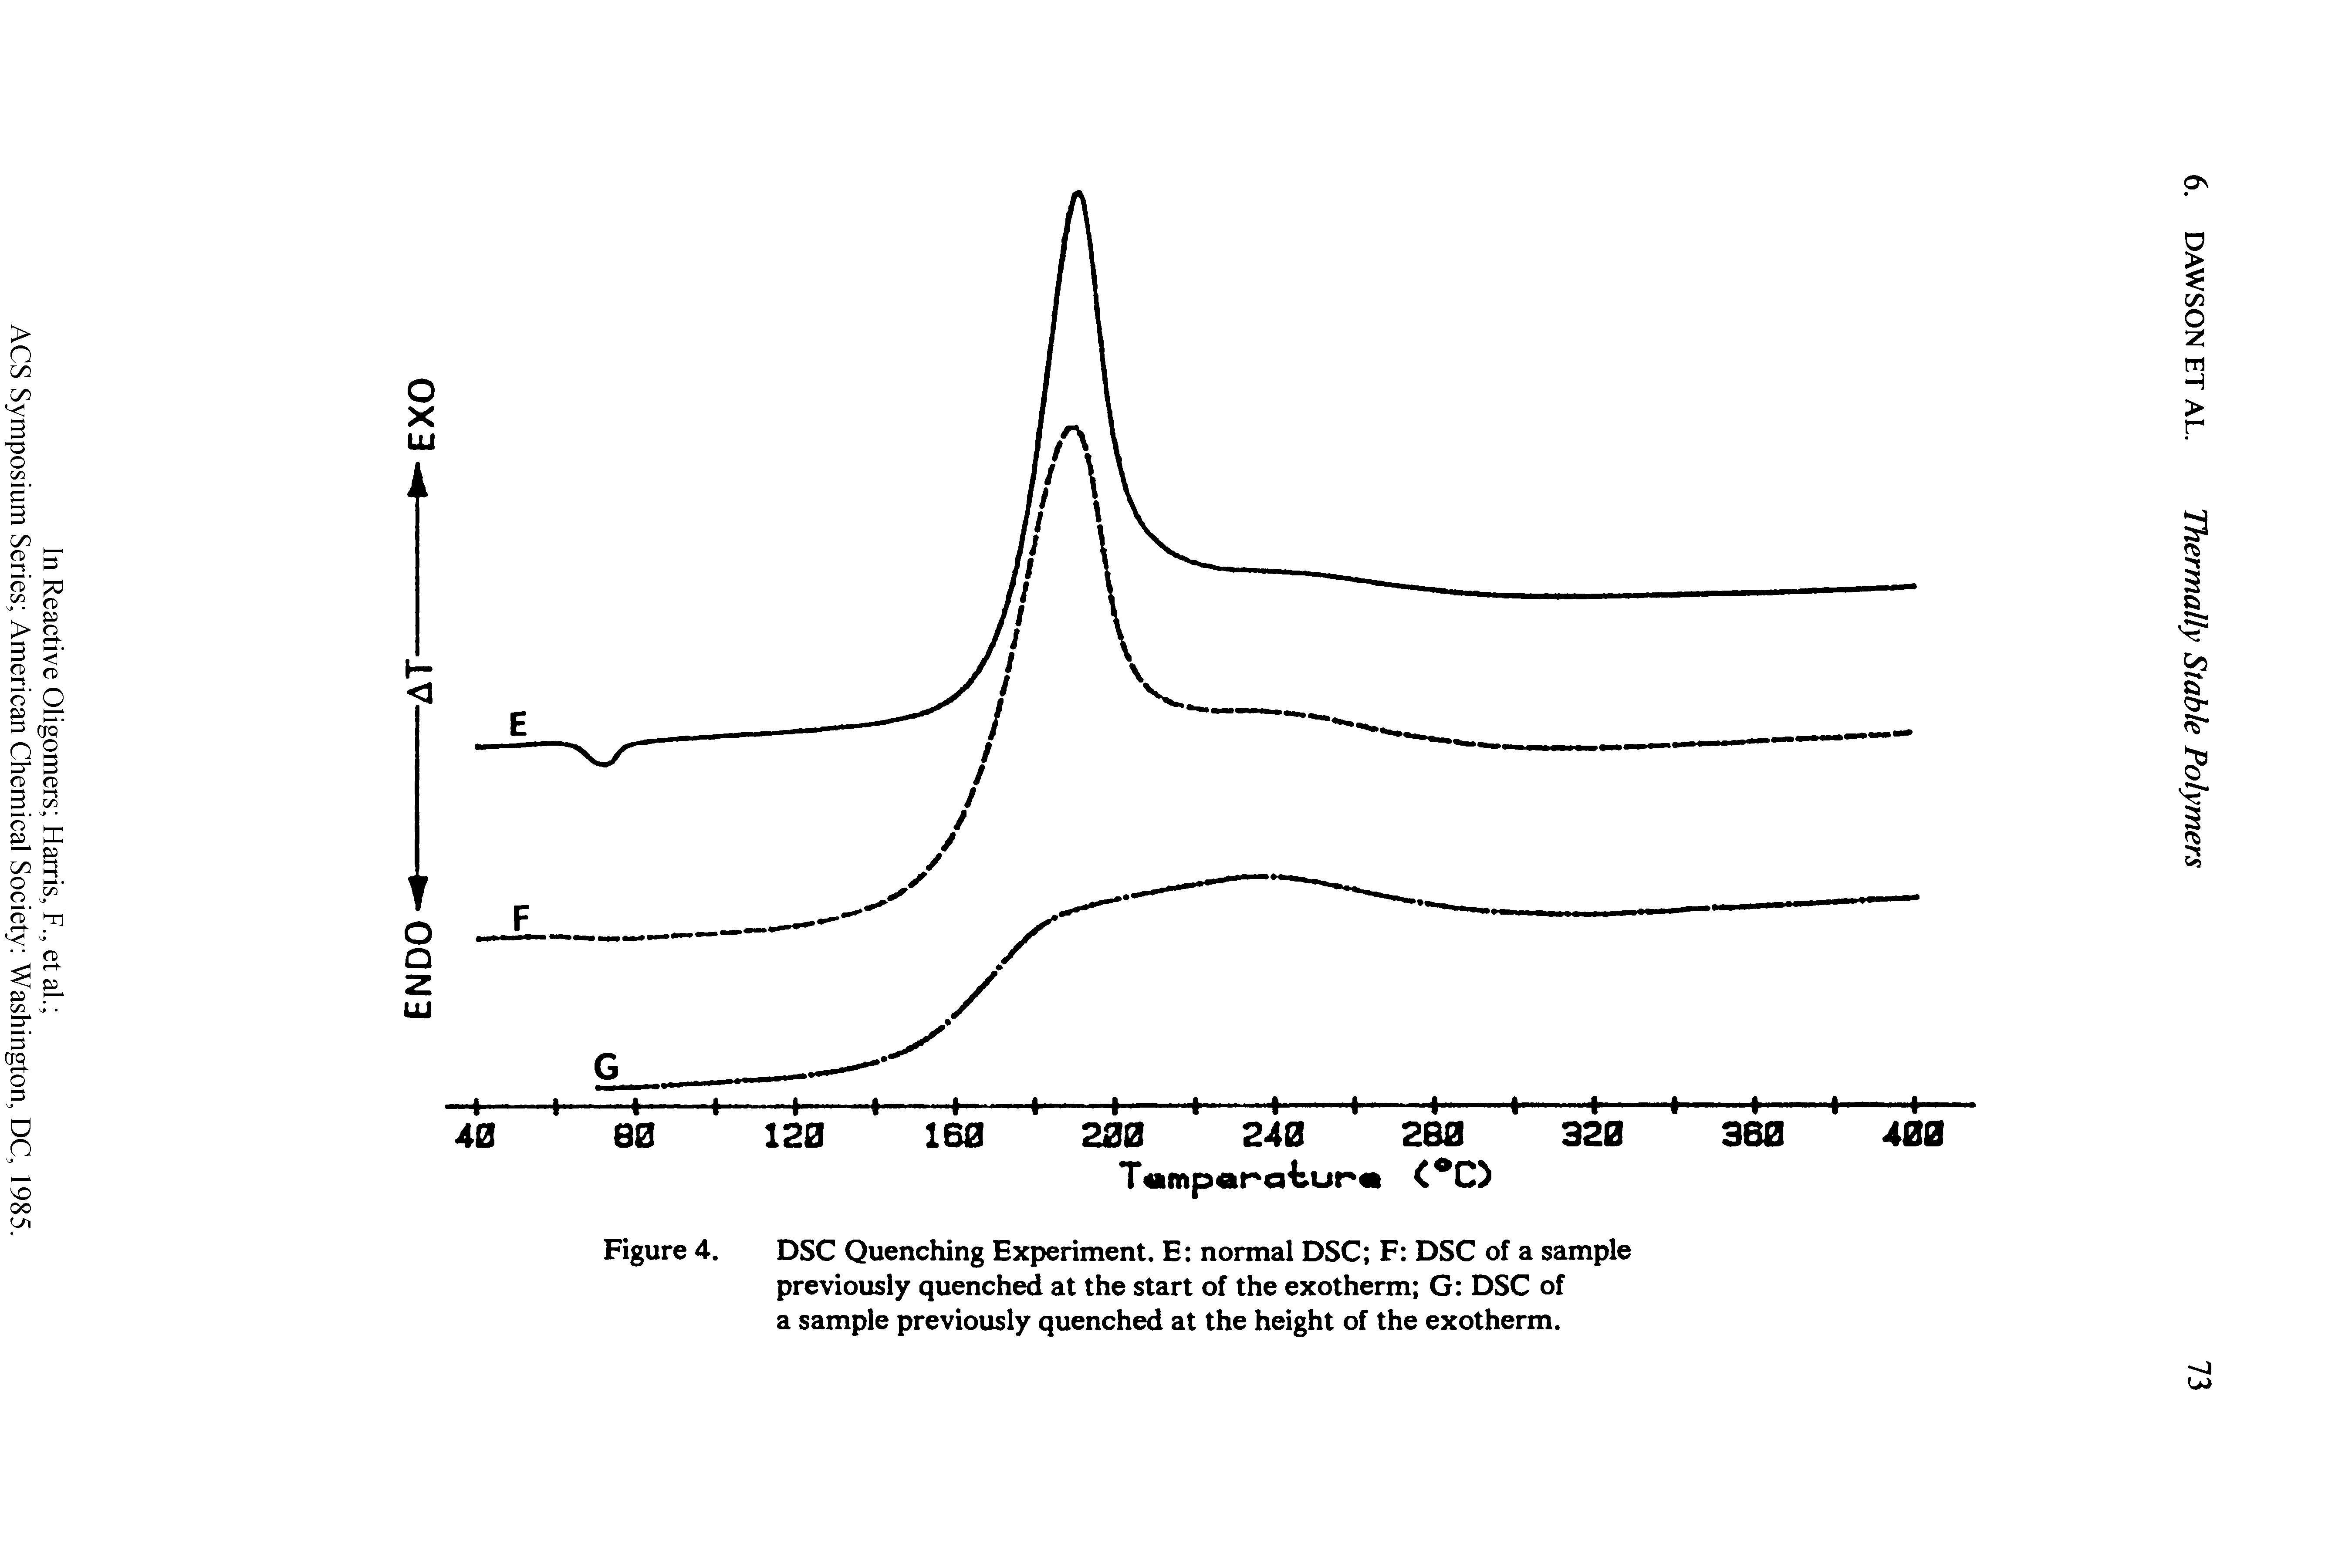 Figure 4. DSC Quenching Experiment. E normal DSC F DSC of a sample previously quenched at the start of the exotherm G DSC of a sample previously quenched at the height of the exotherm.